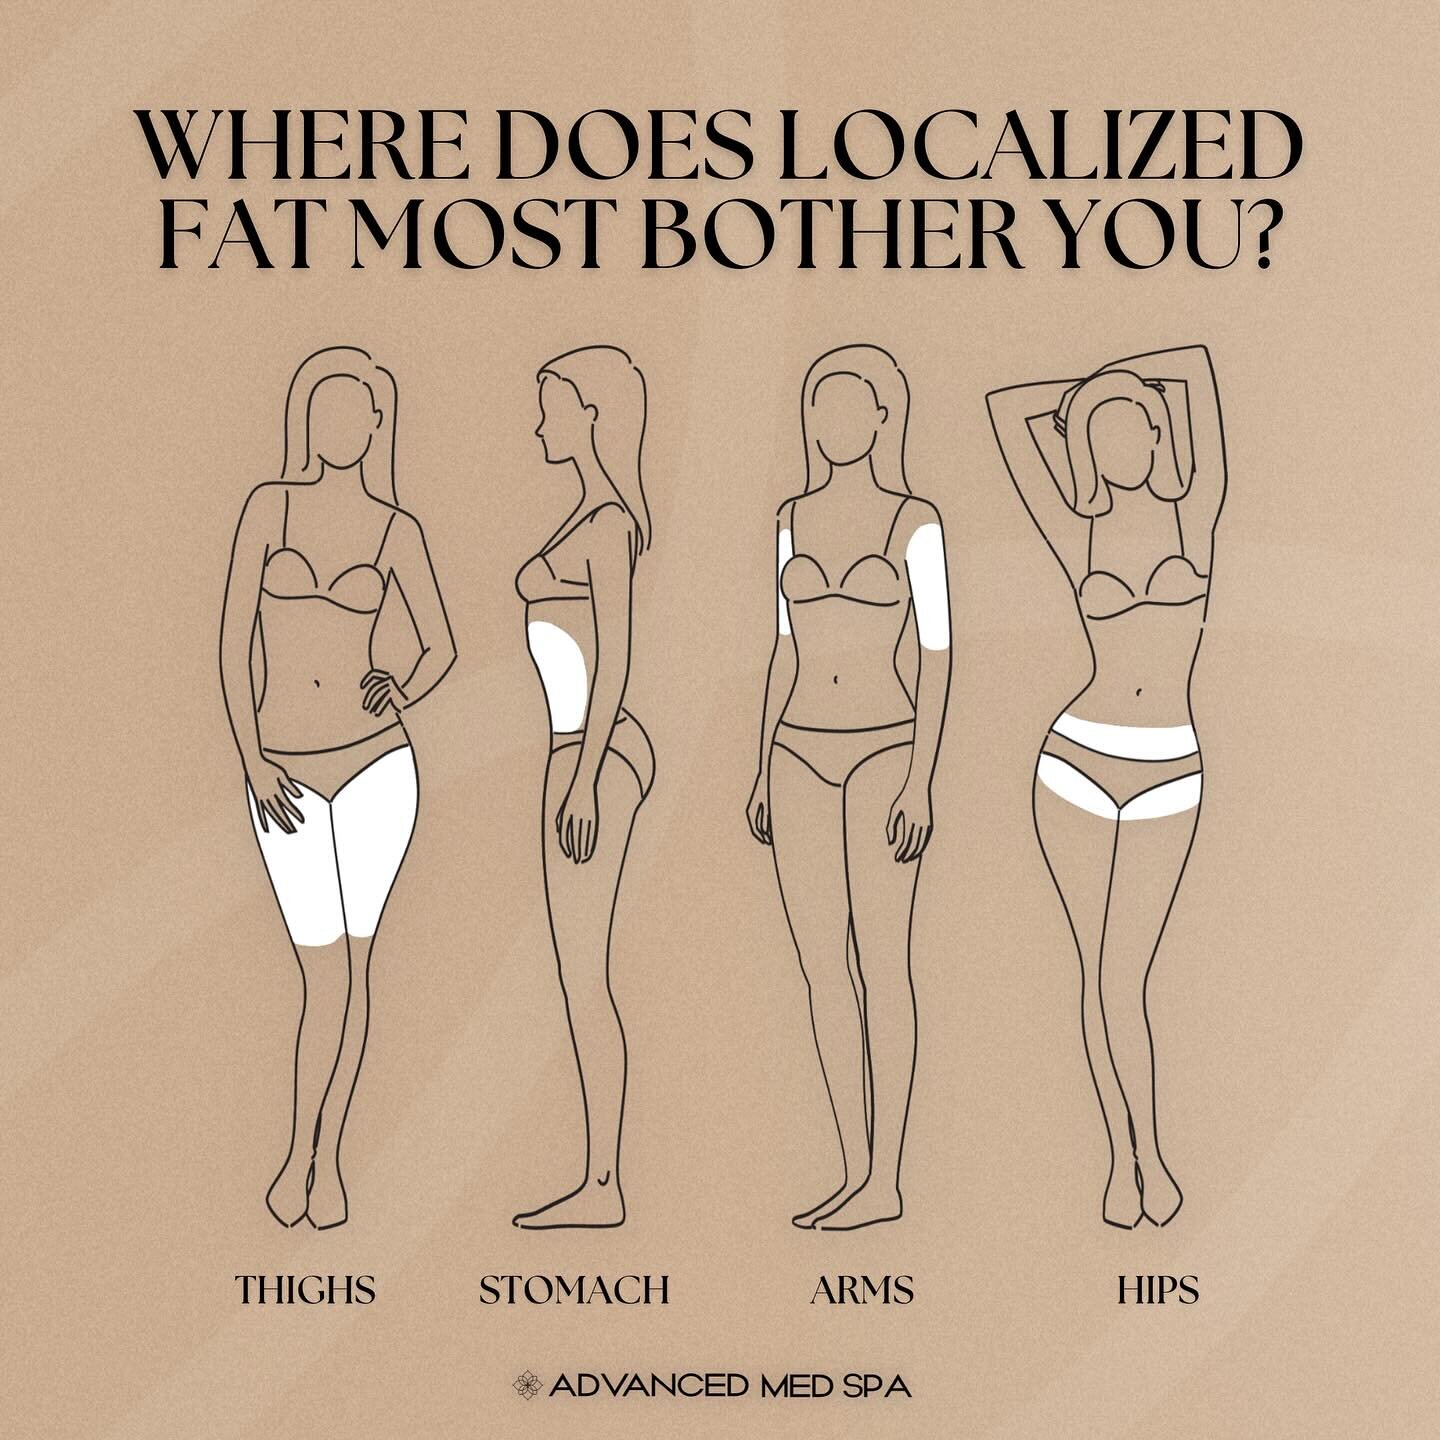 WHERE DOES LOCALIZED FAT MOST BOTHER YOU? 🤔 Let us know in the comments below 👇🏼⁠
⁠
No matter which area you want to target &mdash; back rolls, saddle bags, belly pooch, or something else &mdash; we can help 🎯⁠
⁠
SlimLife Body Harmonization proto